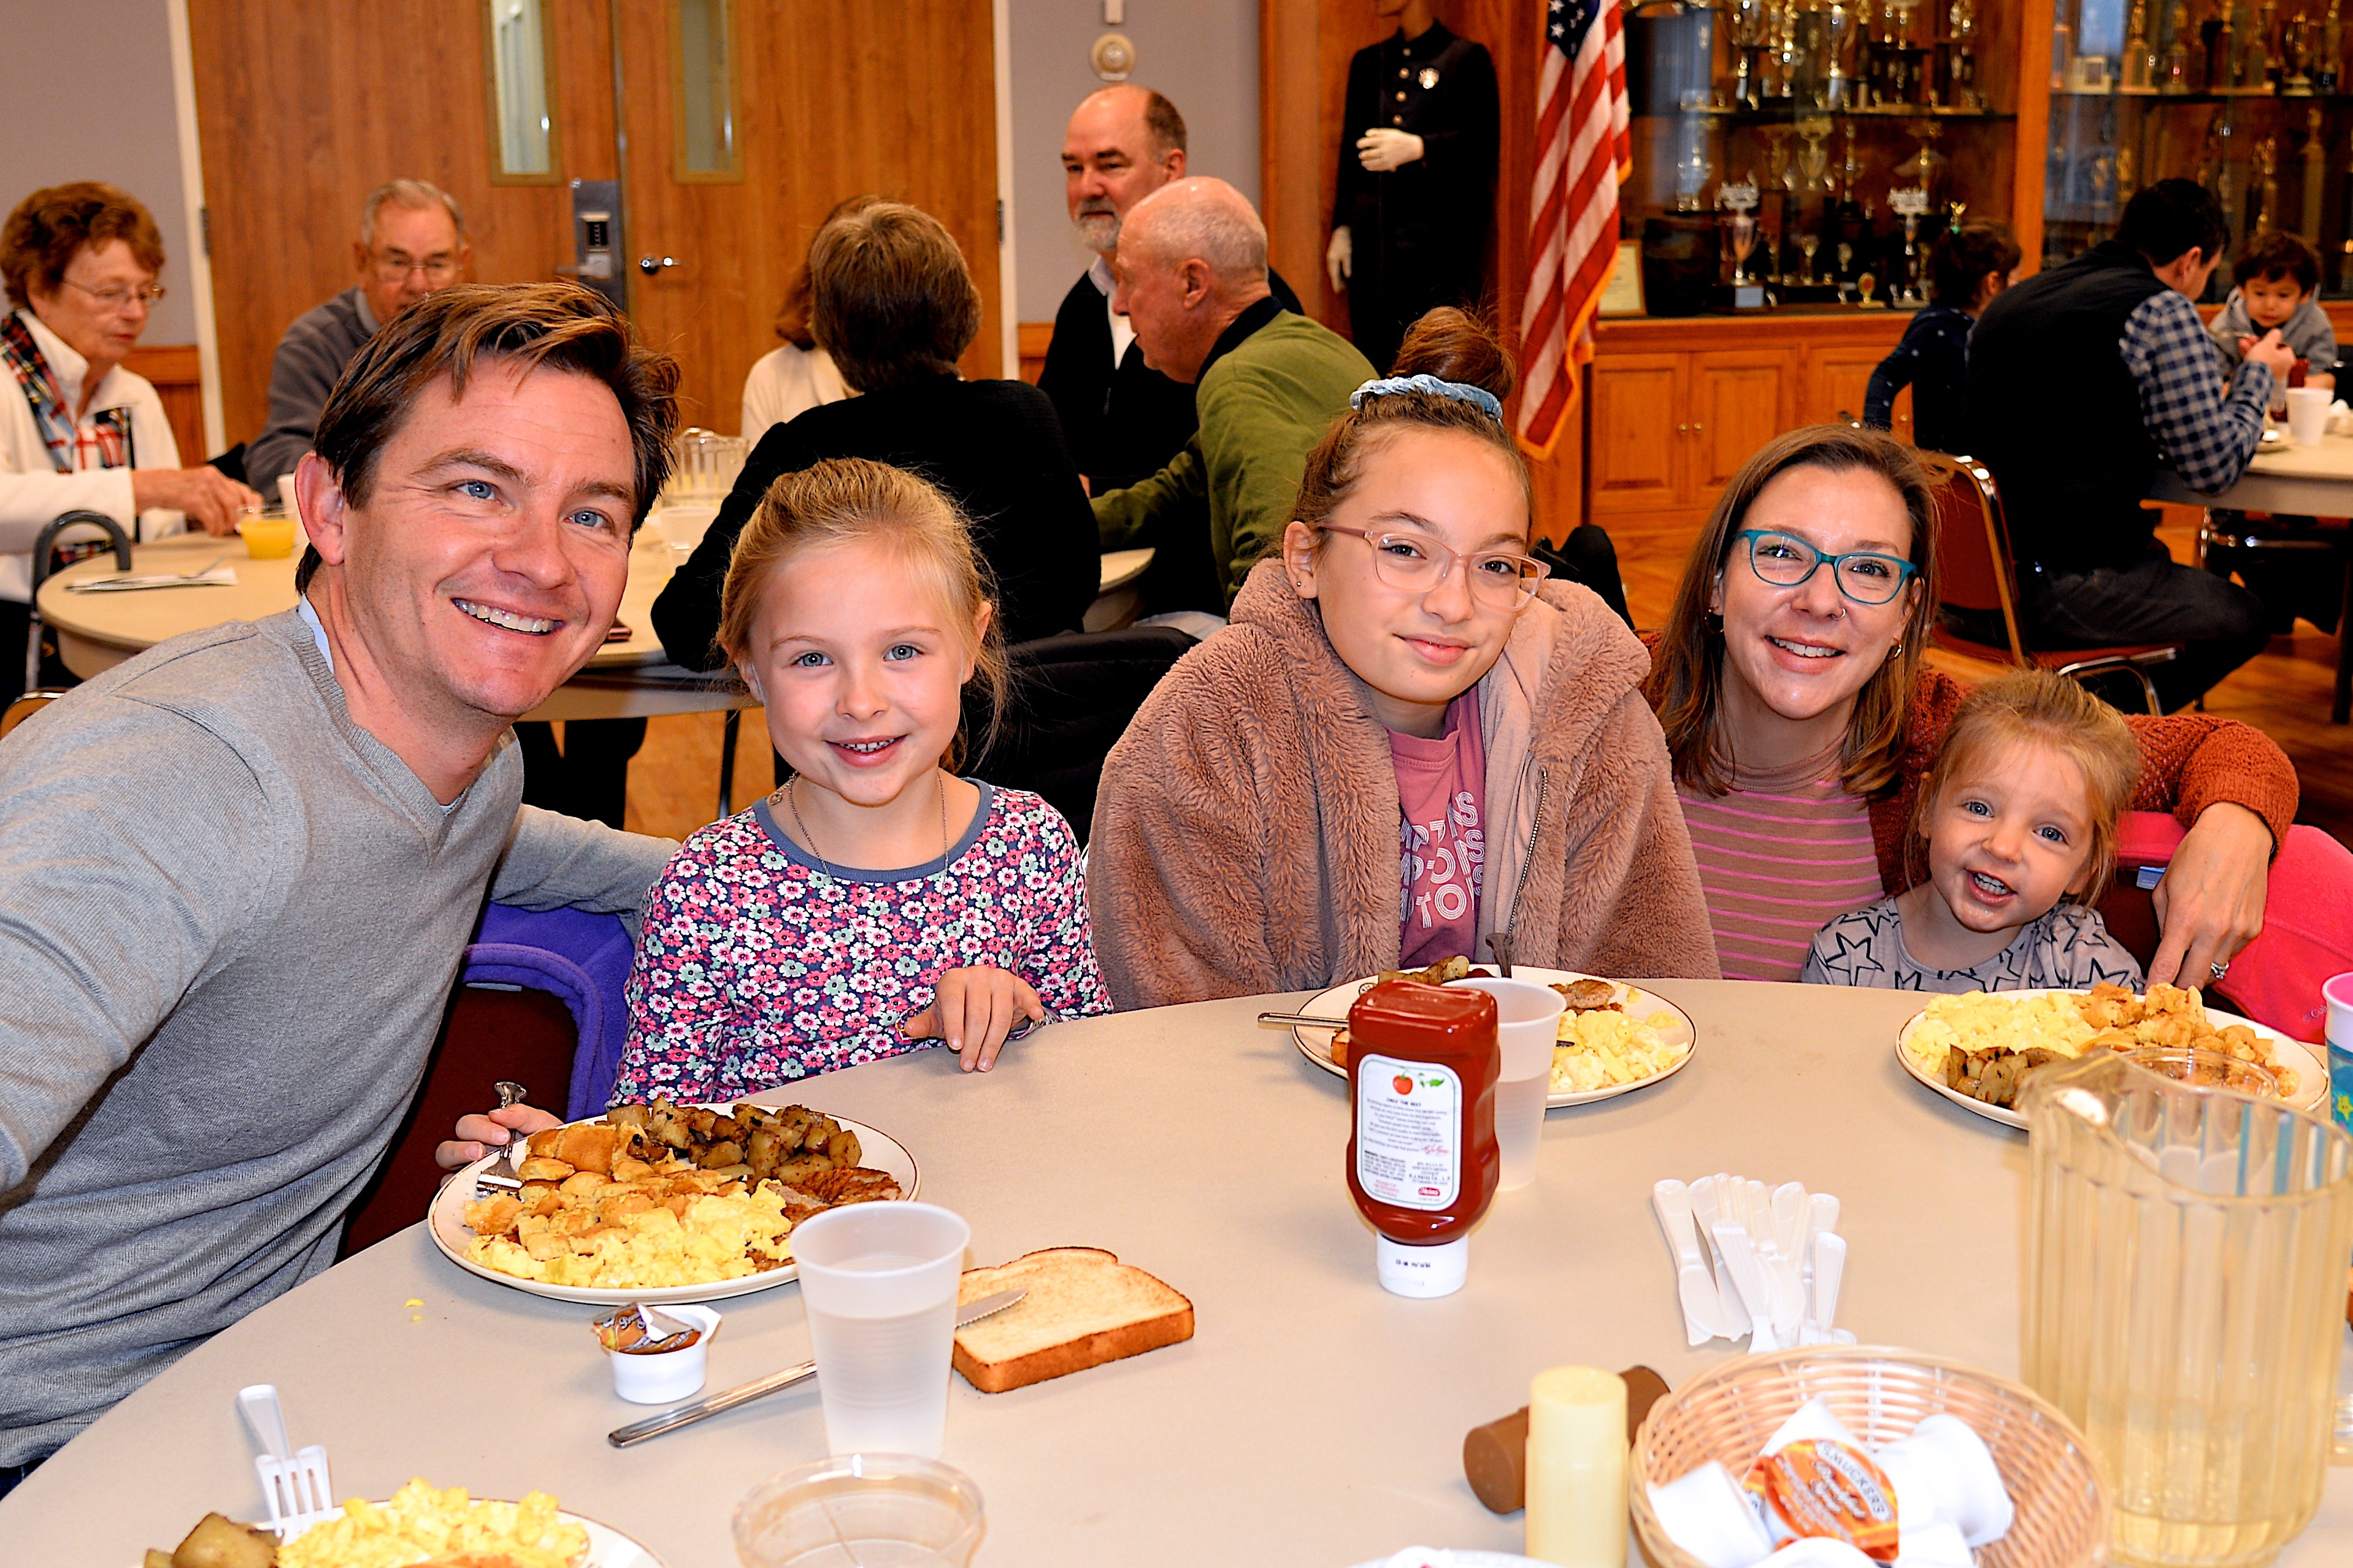 The East Hampton Fire Department hosted a pancake breakfast on Sunday, raising funds for the Eleanor Whitmore Early Childhood Center. Among those attended were members of the Feleppa family, from left, Alex, Fay, Ea, Jolie and Krissy.  KYRIL BROMLEY 